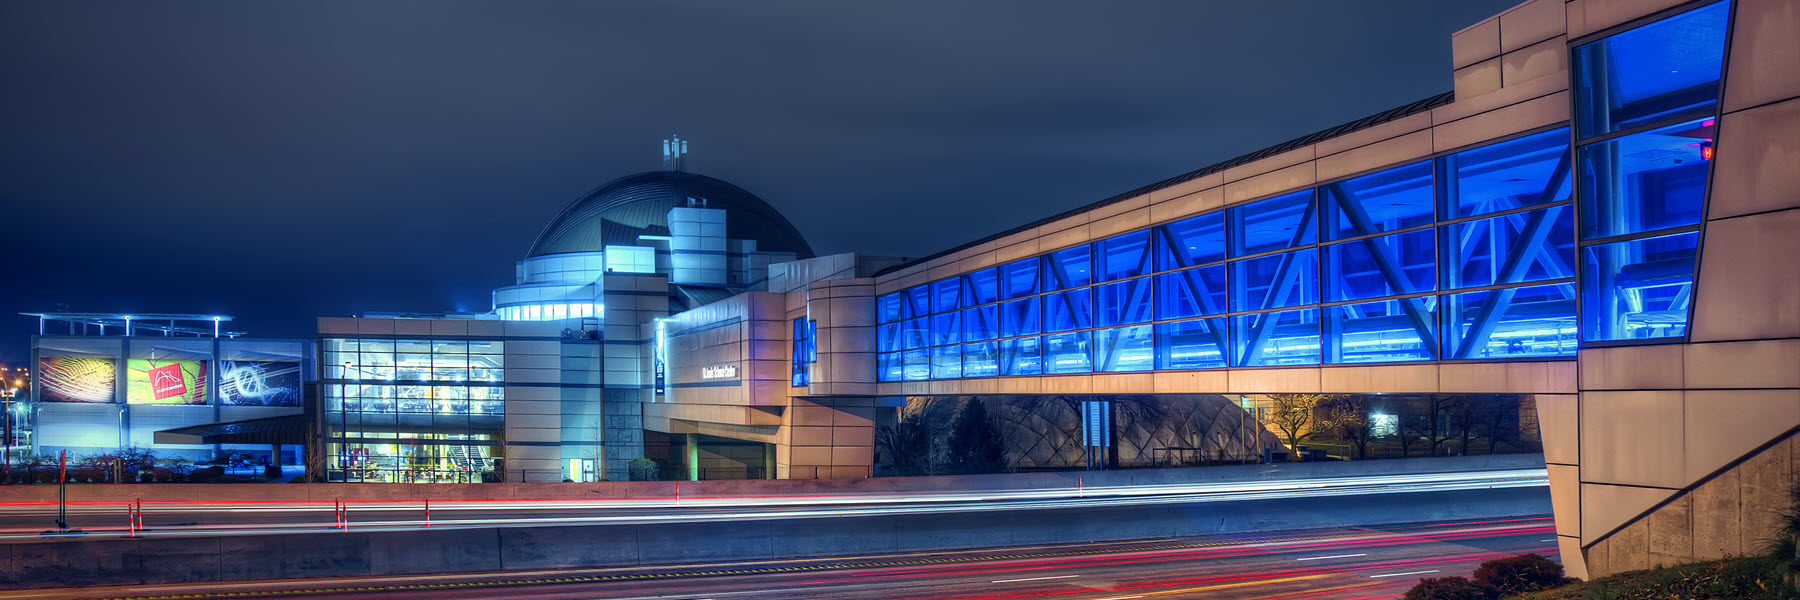 The exterior of the St. Louis Science Center at night.